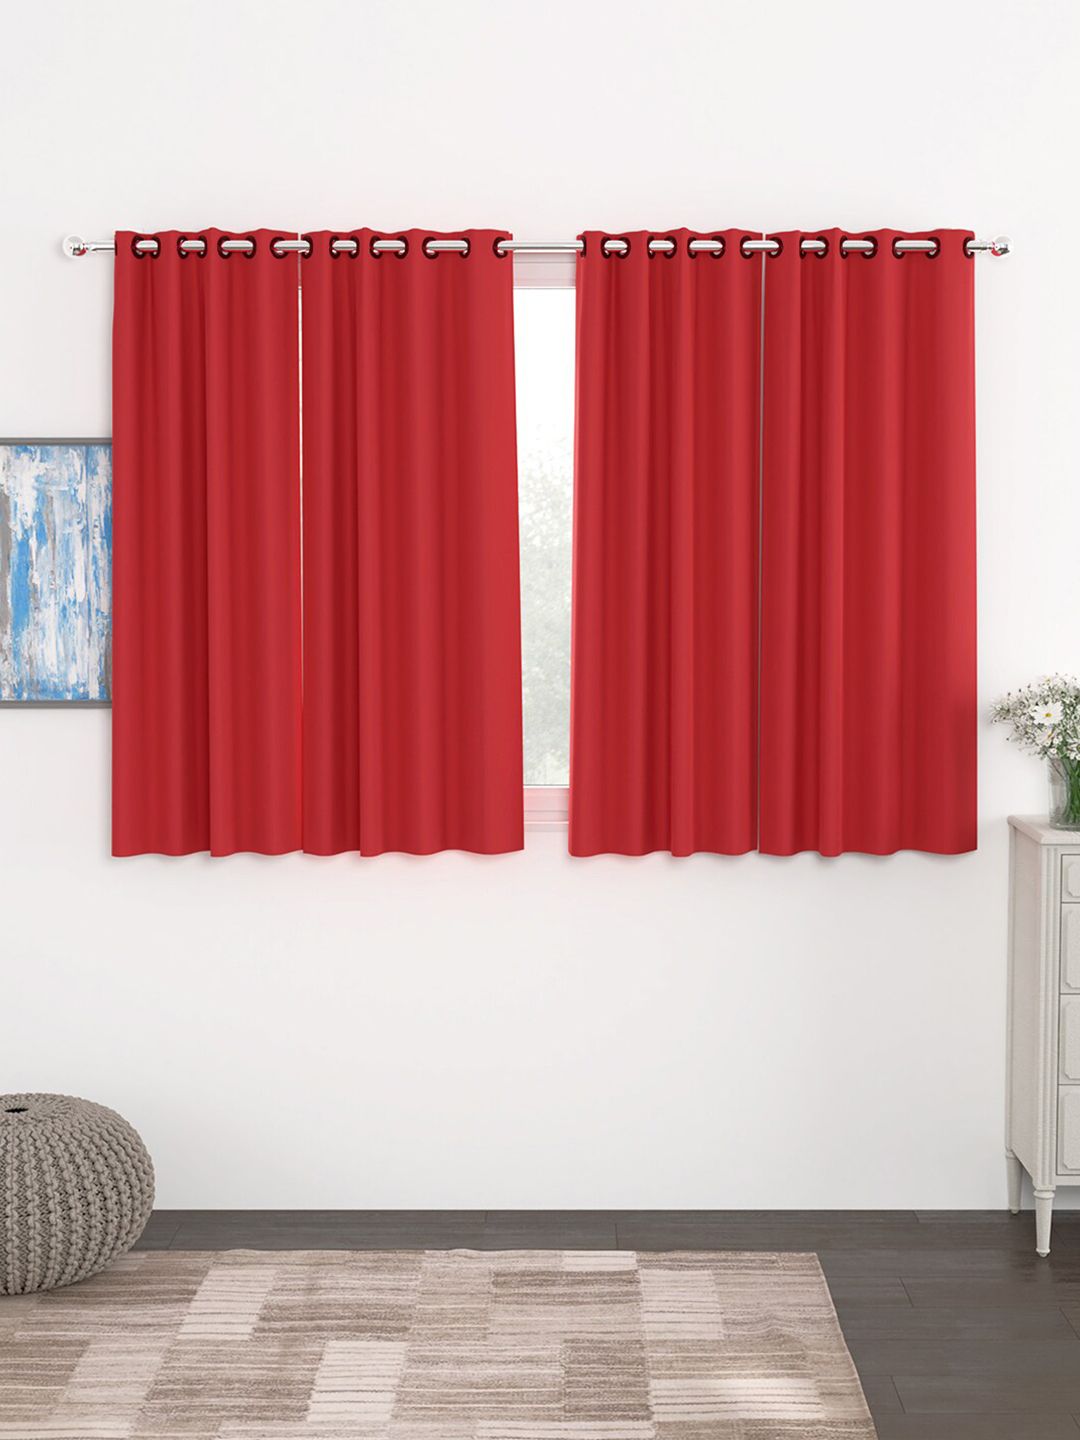 Story@home Red Set of 4 Black Out Window Curtain Price in India